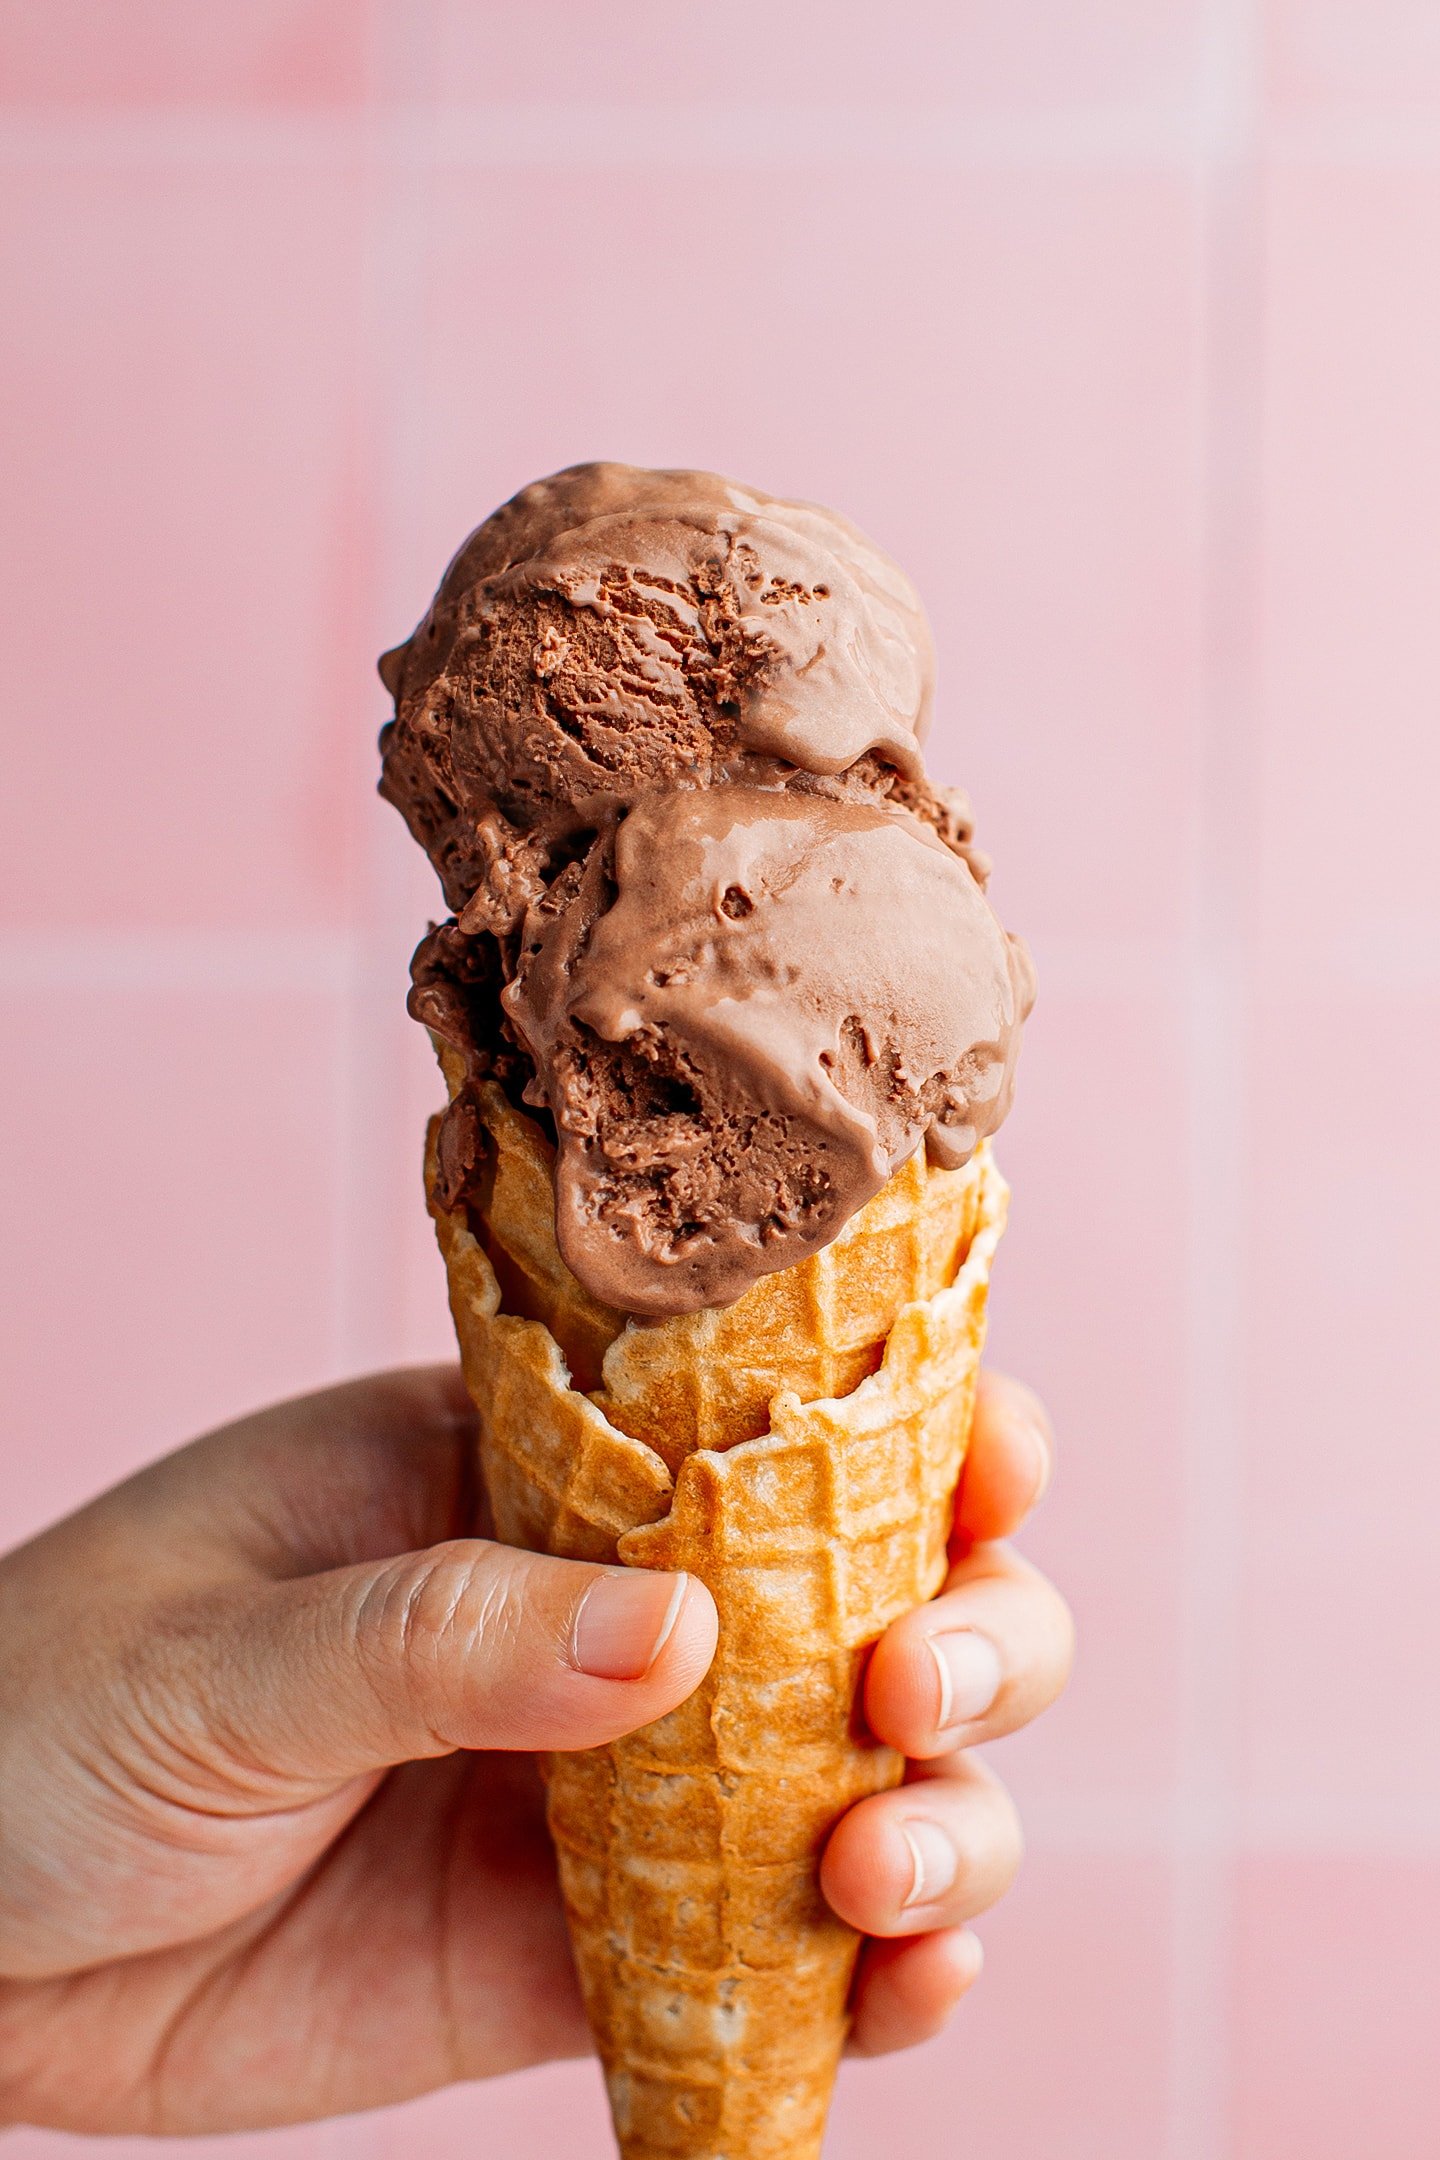 Two scoops of chocolate ice cream in a waffle cone.